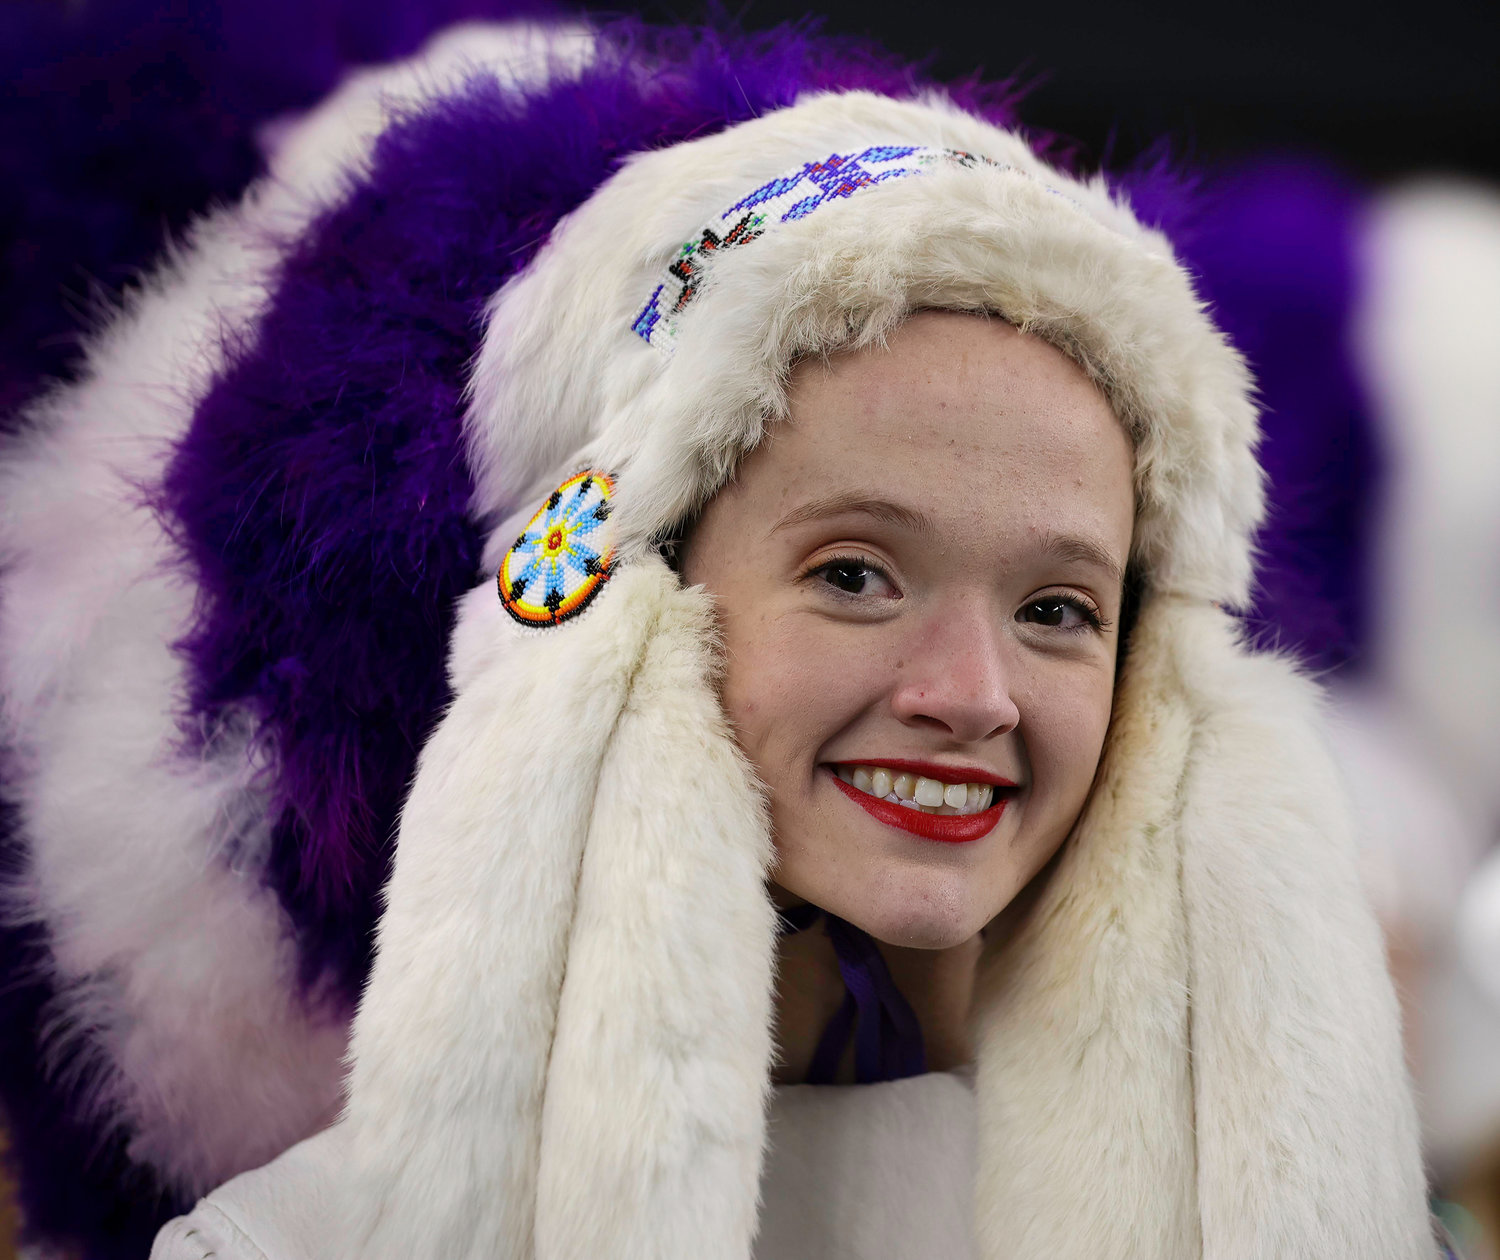 A Port Neches-Groves dance team member during the Class 5A Division II football state championship game between South Oak Cliff and Port Neches-Groves in Arlington, Texas, on Dec. 16, 2022.